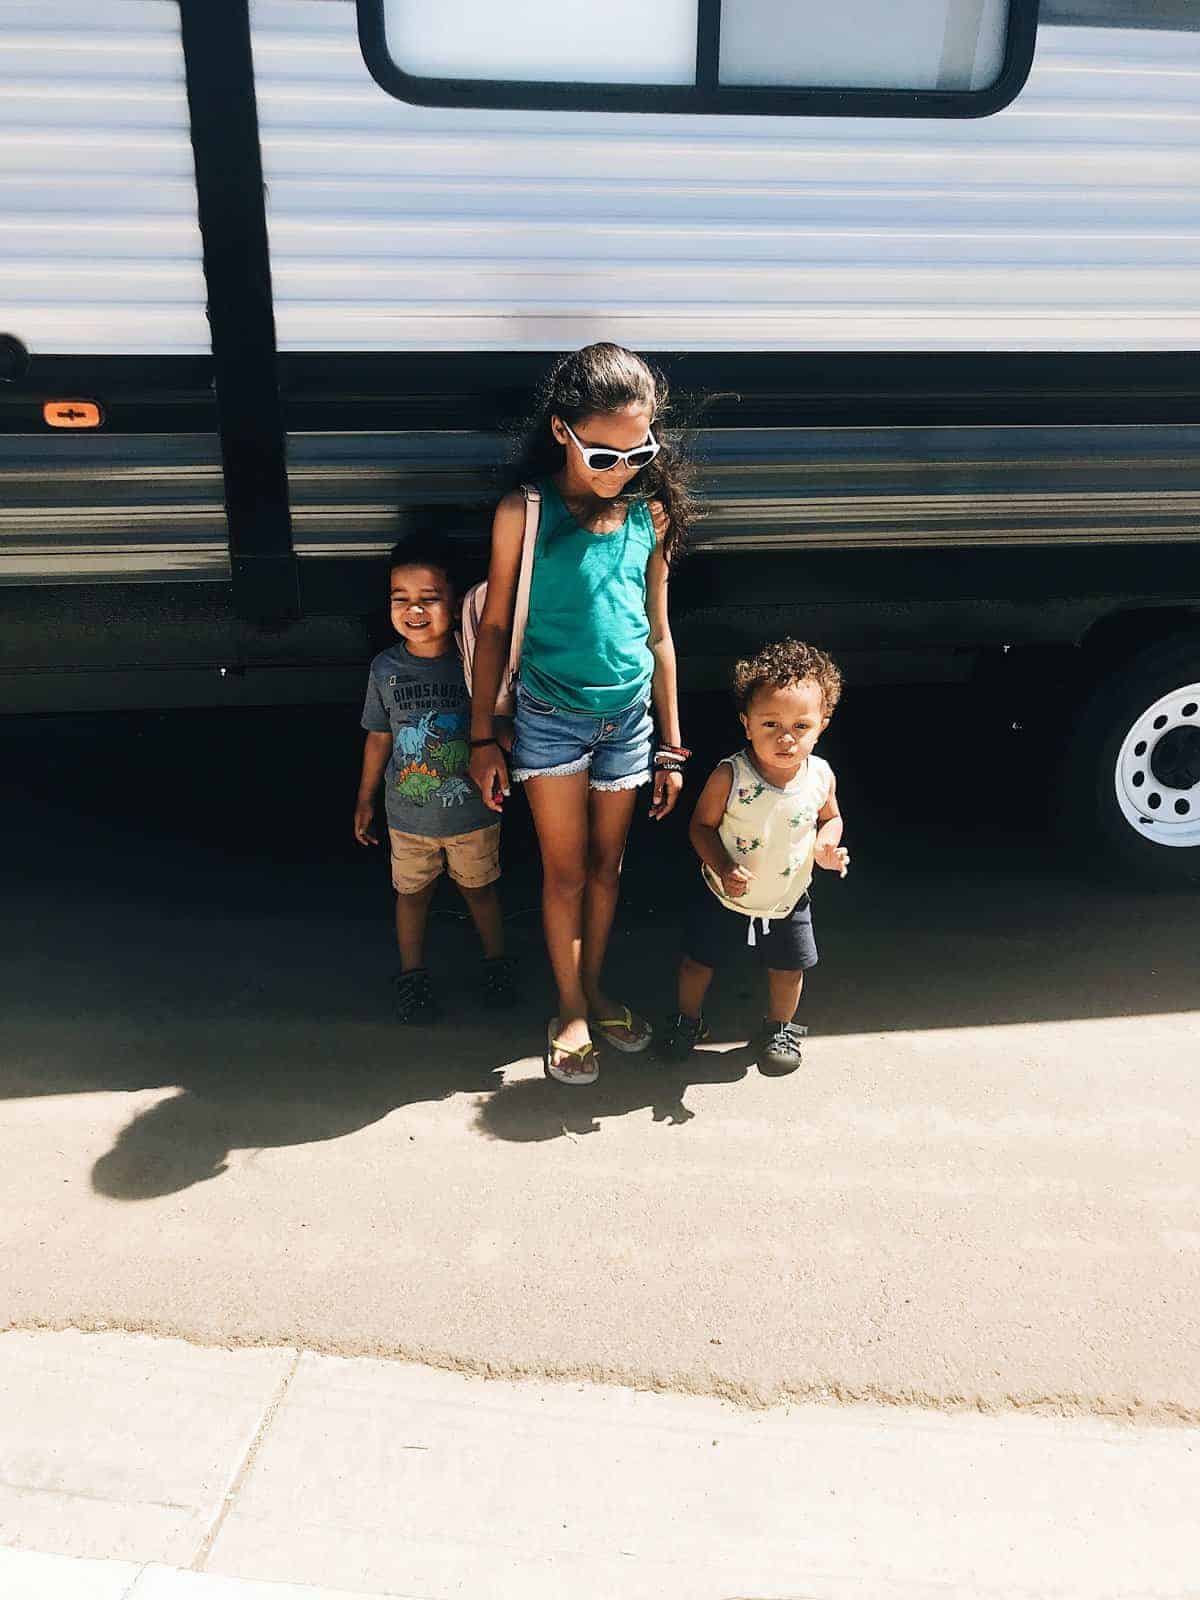 How to get started RVing with kids